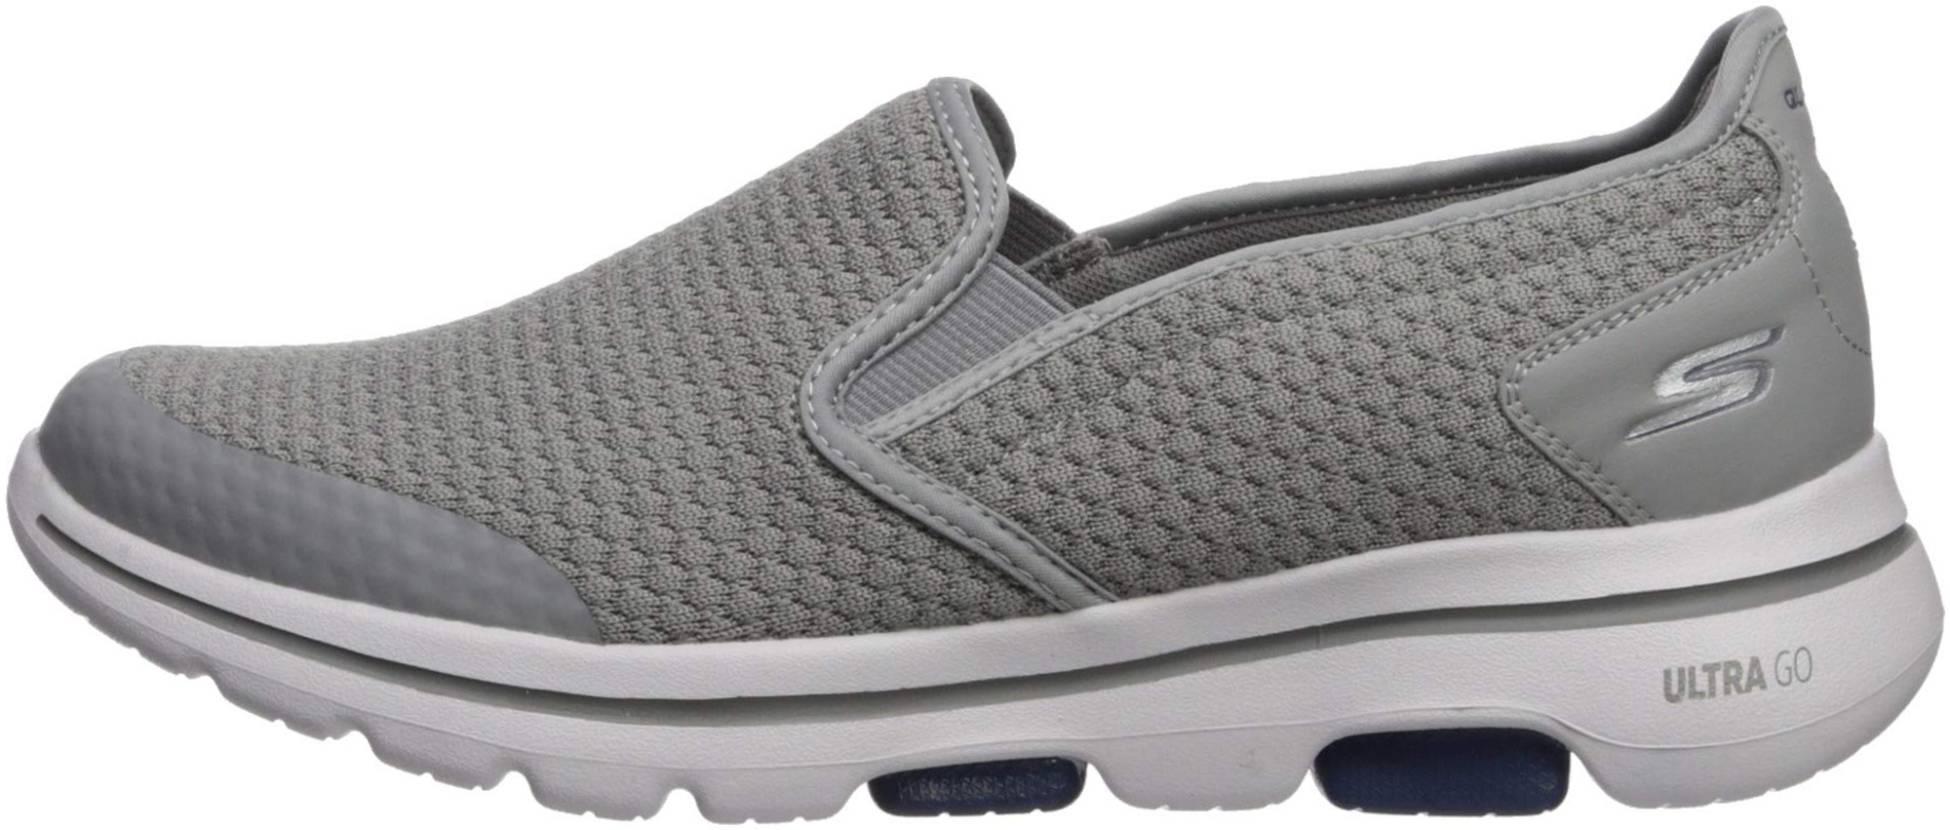 skechers go walk recovery review